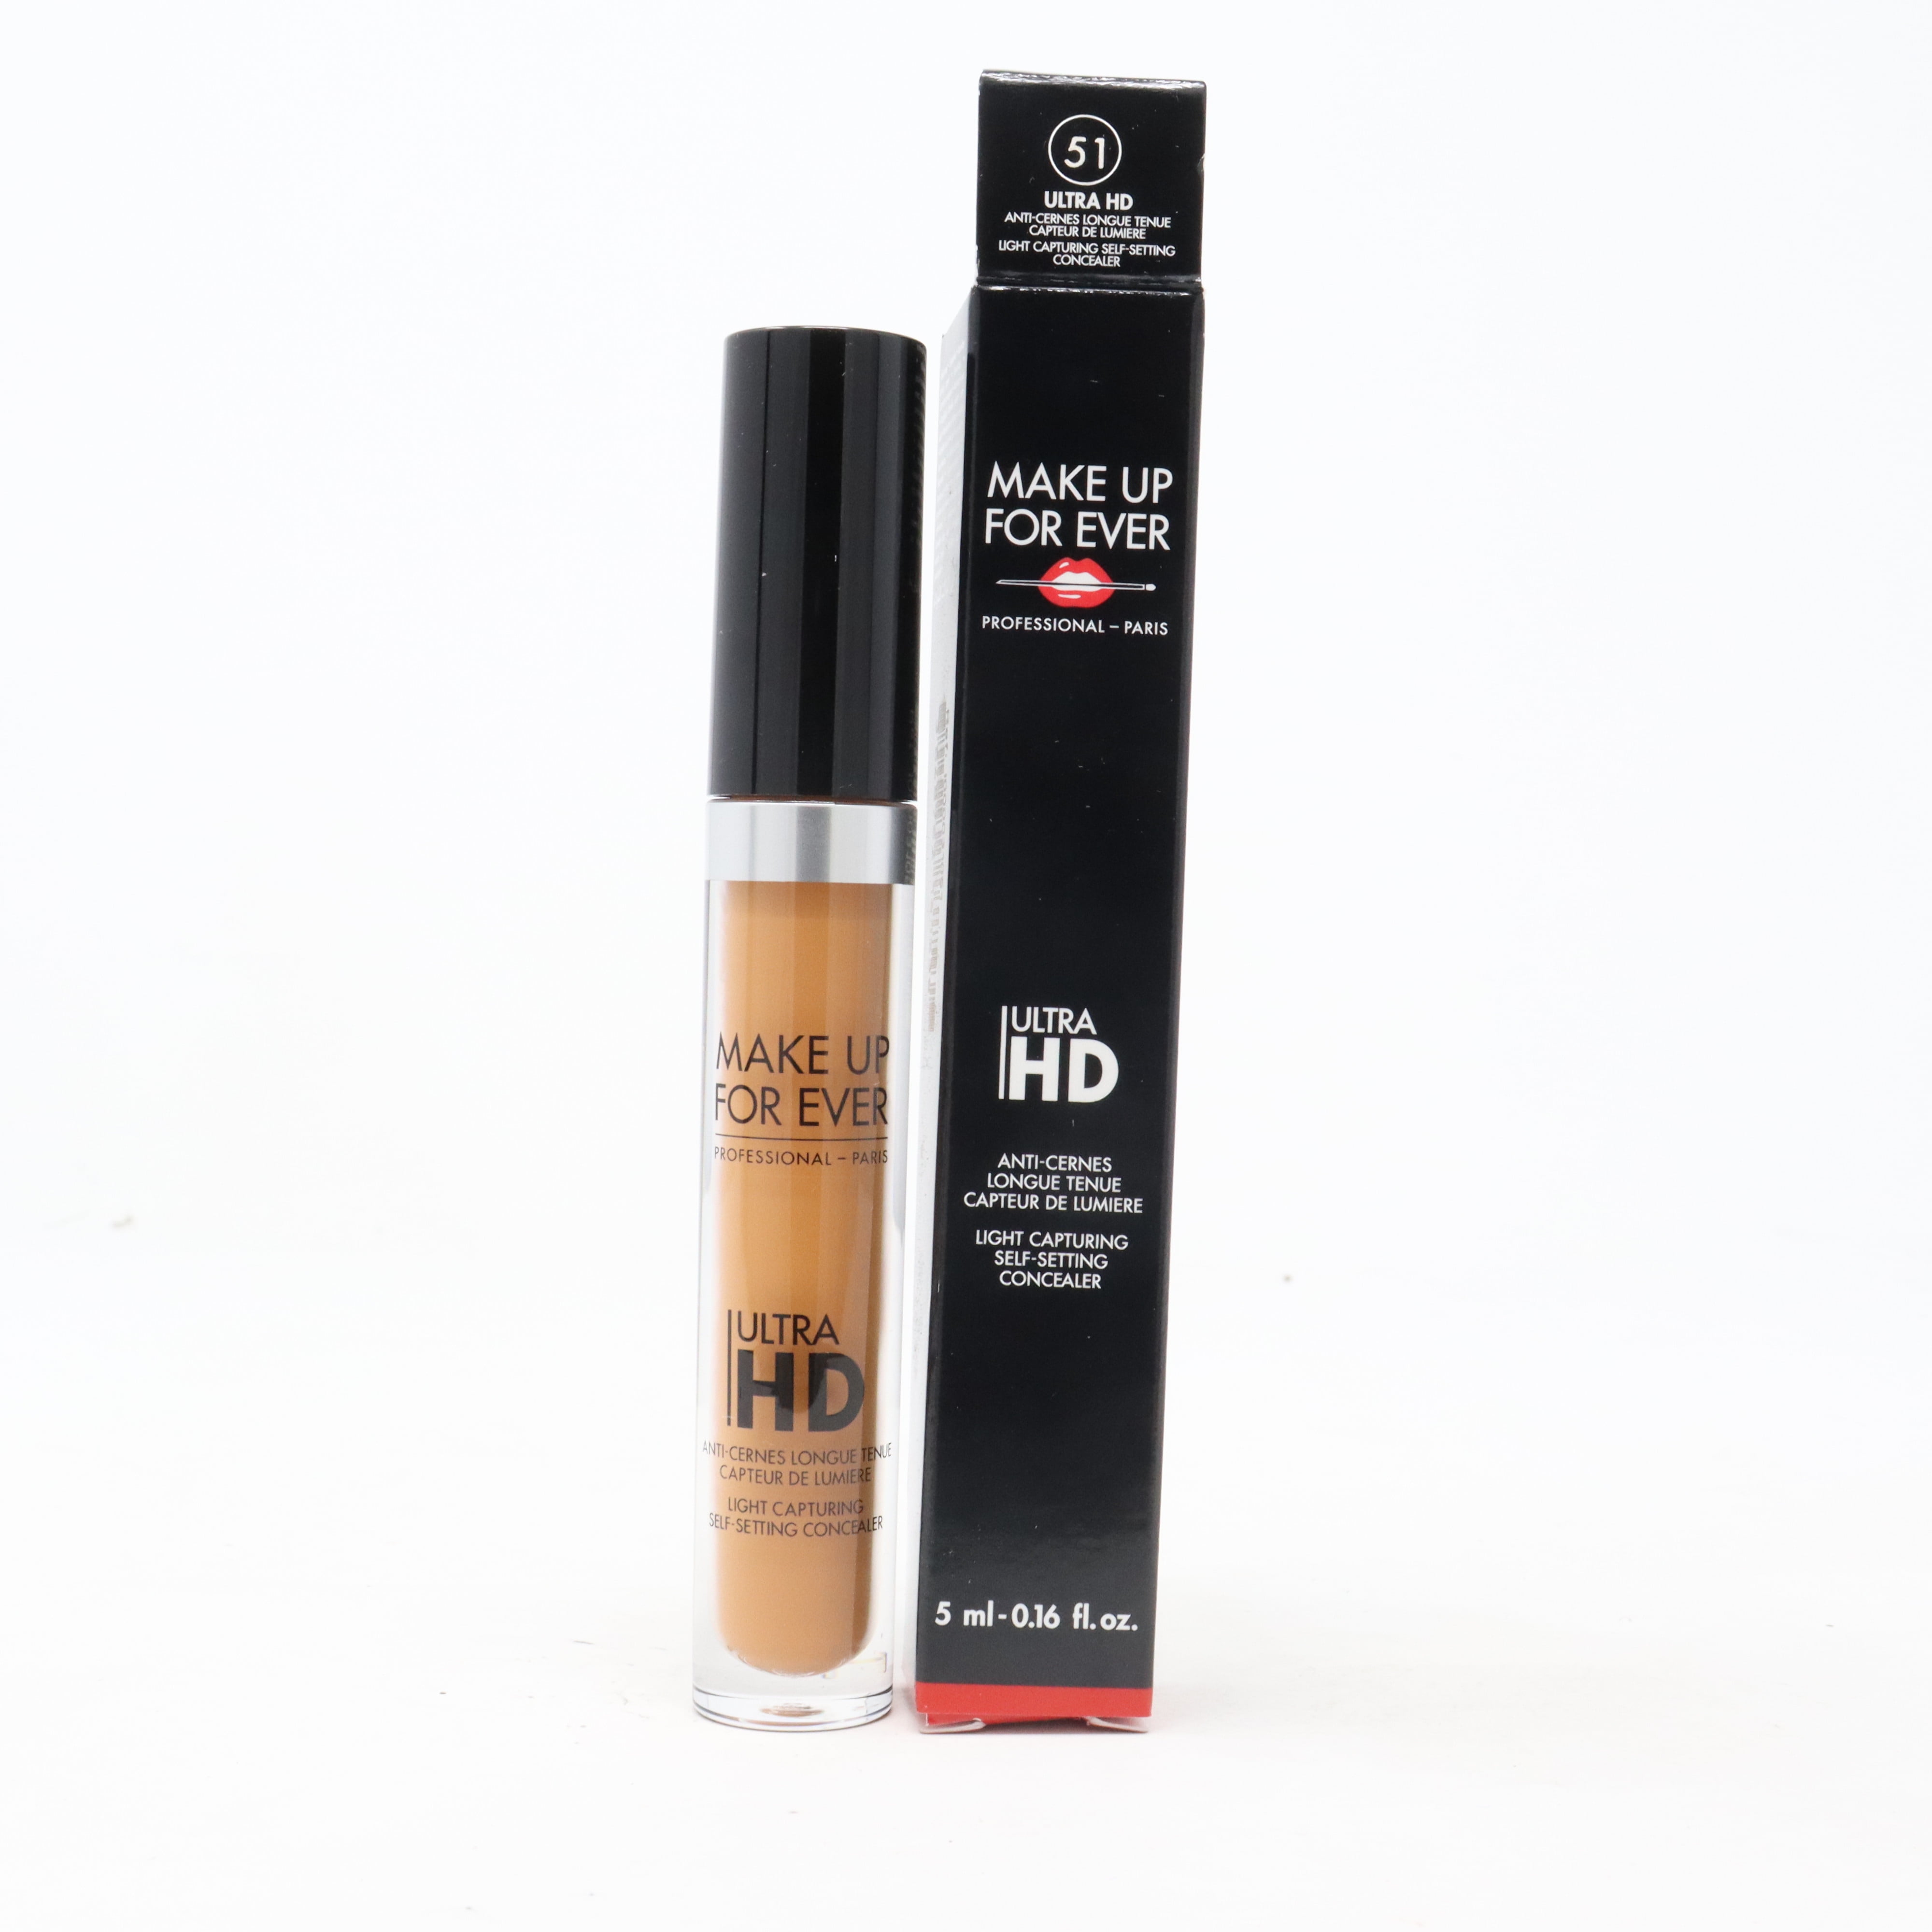 Make Up For Ever Ultra Hd Self Setting Concealer 51 0.16oz/5ml New With Box  